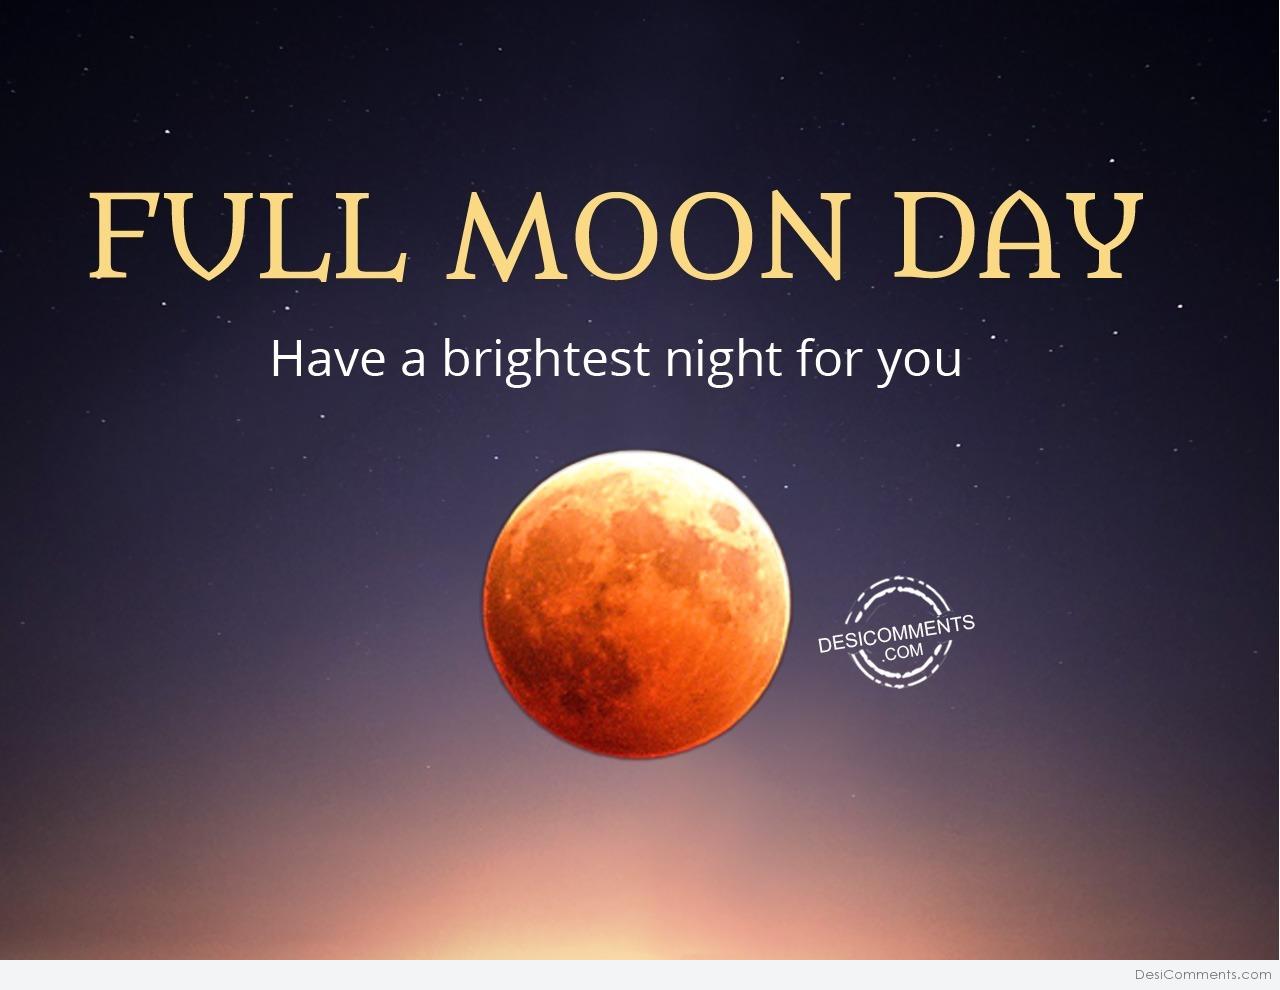 Full Moon Day Pictures, Images, Graphics for Facebook, Whatsapp